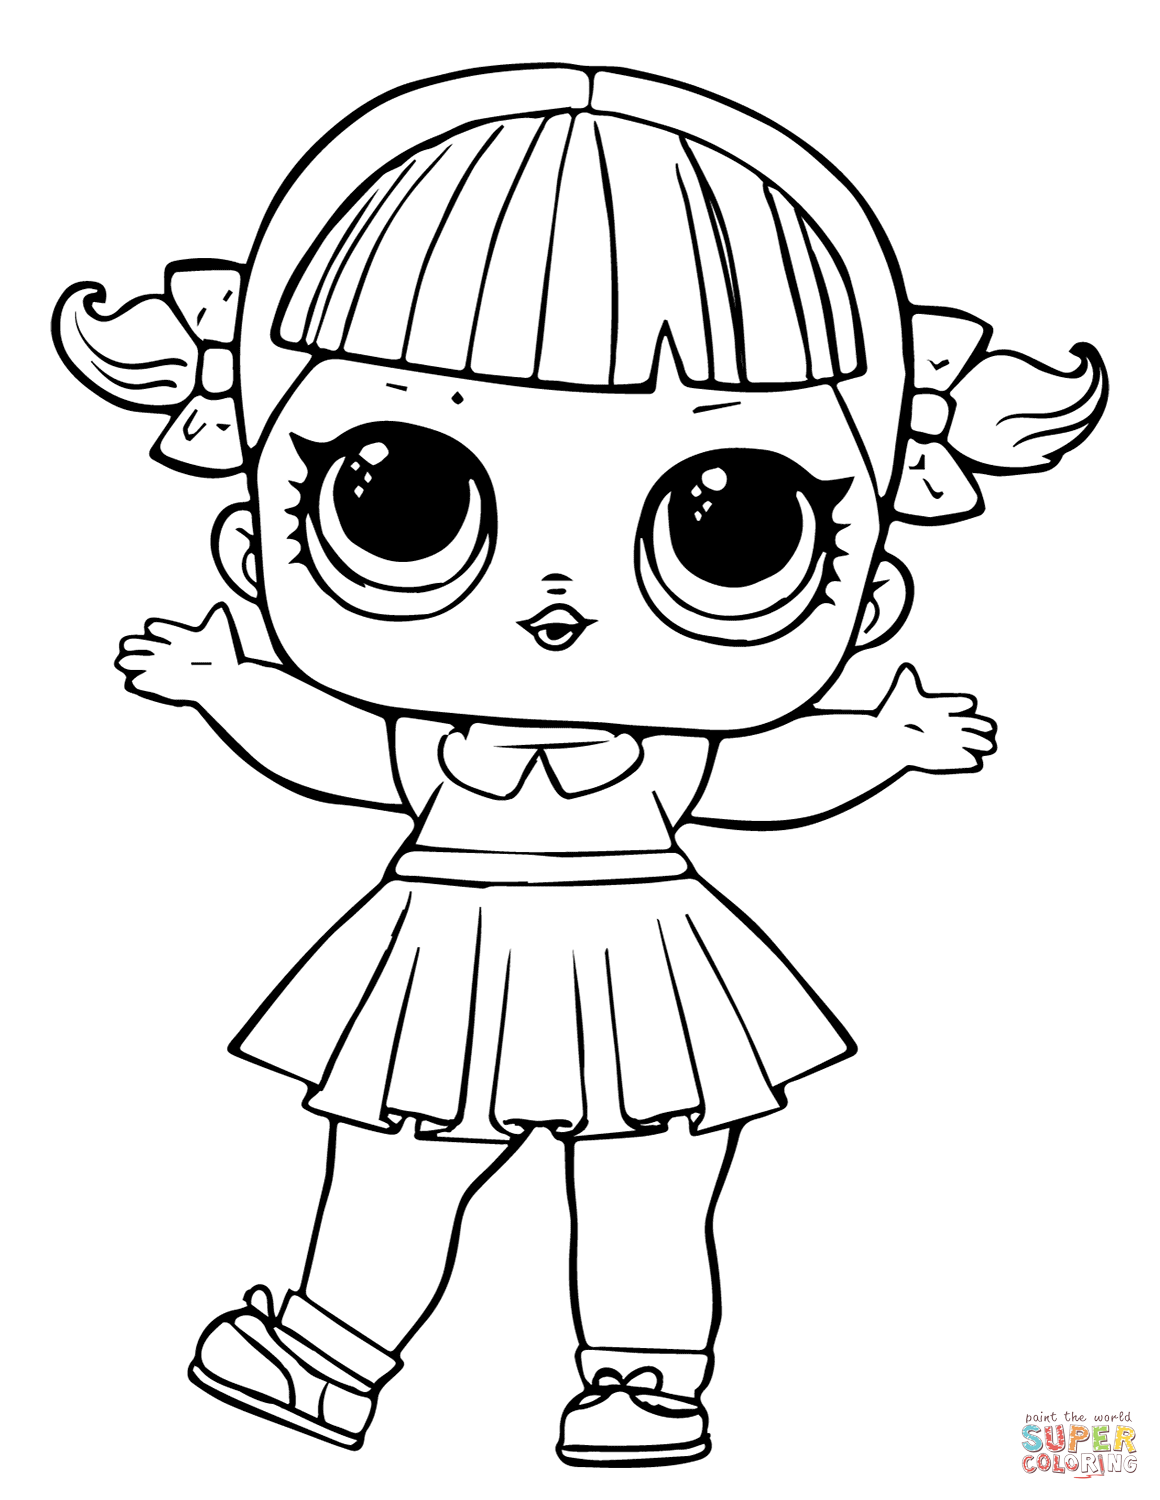 Lol doll line dancer coloring page free printable coloring pages